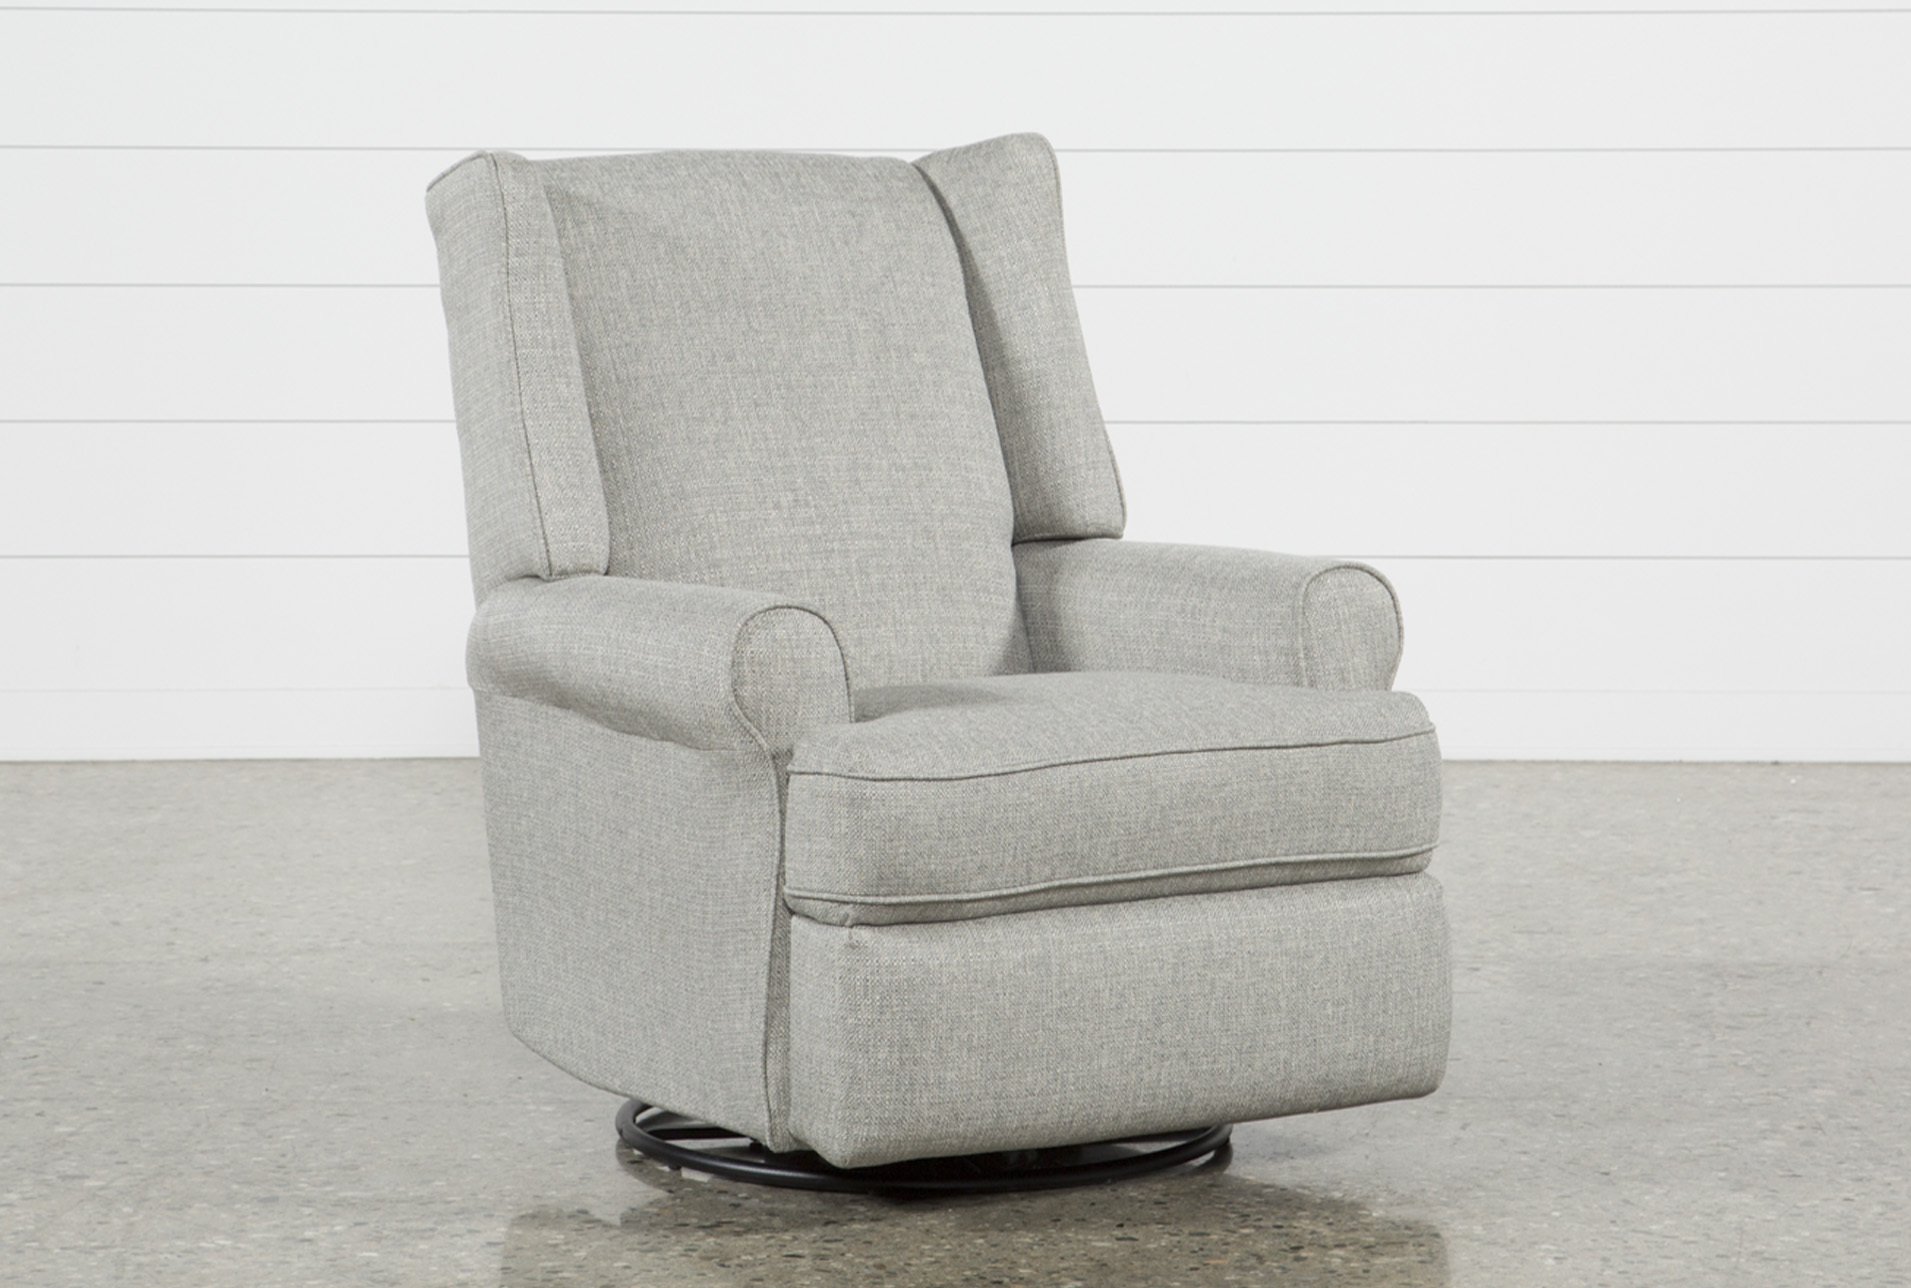 glider recliners mari swivel glider recliner (qty: 1) has been successfully added to your MXIEWPJ